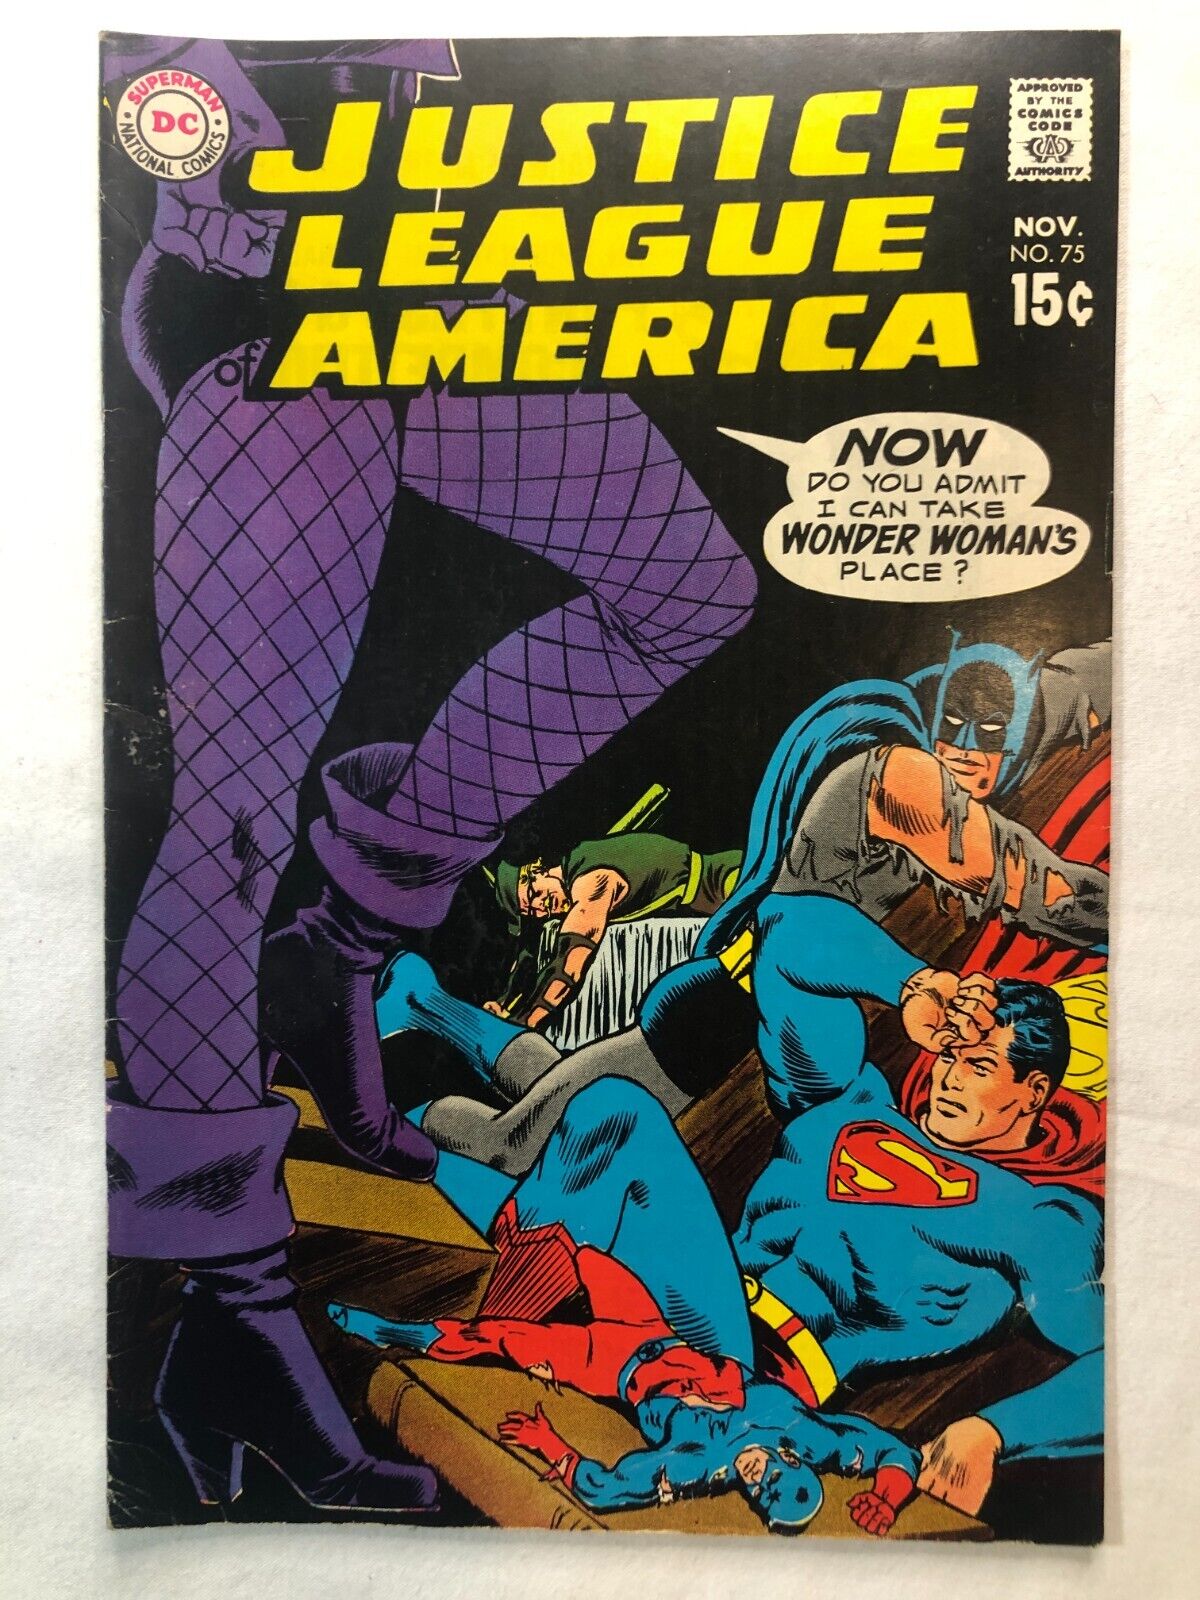 Justice League of America #75 Nov 1969 Key Issue 1st Black Canary Vintage DC